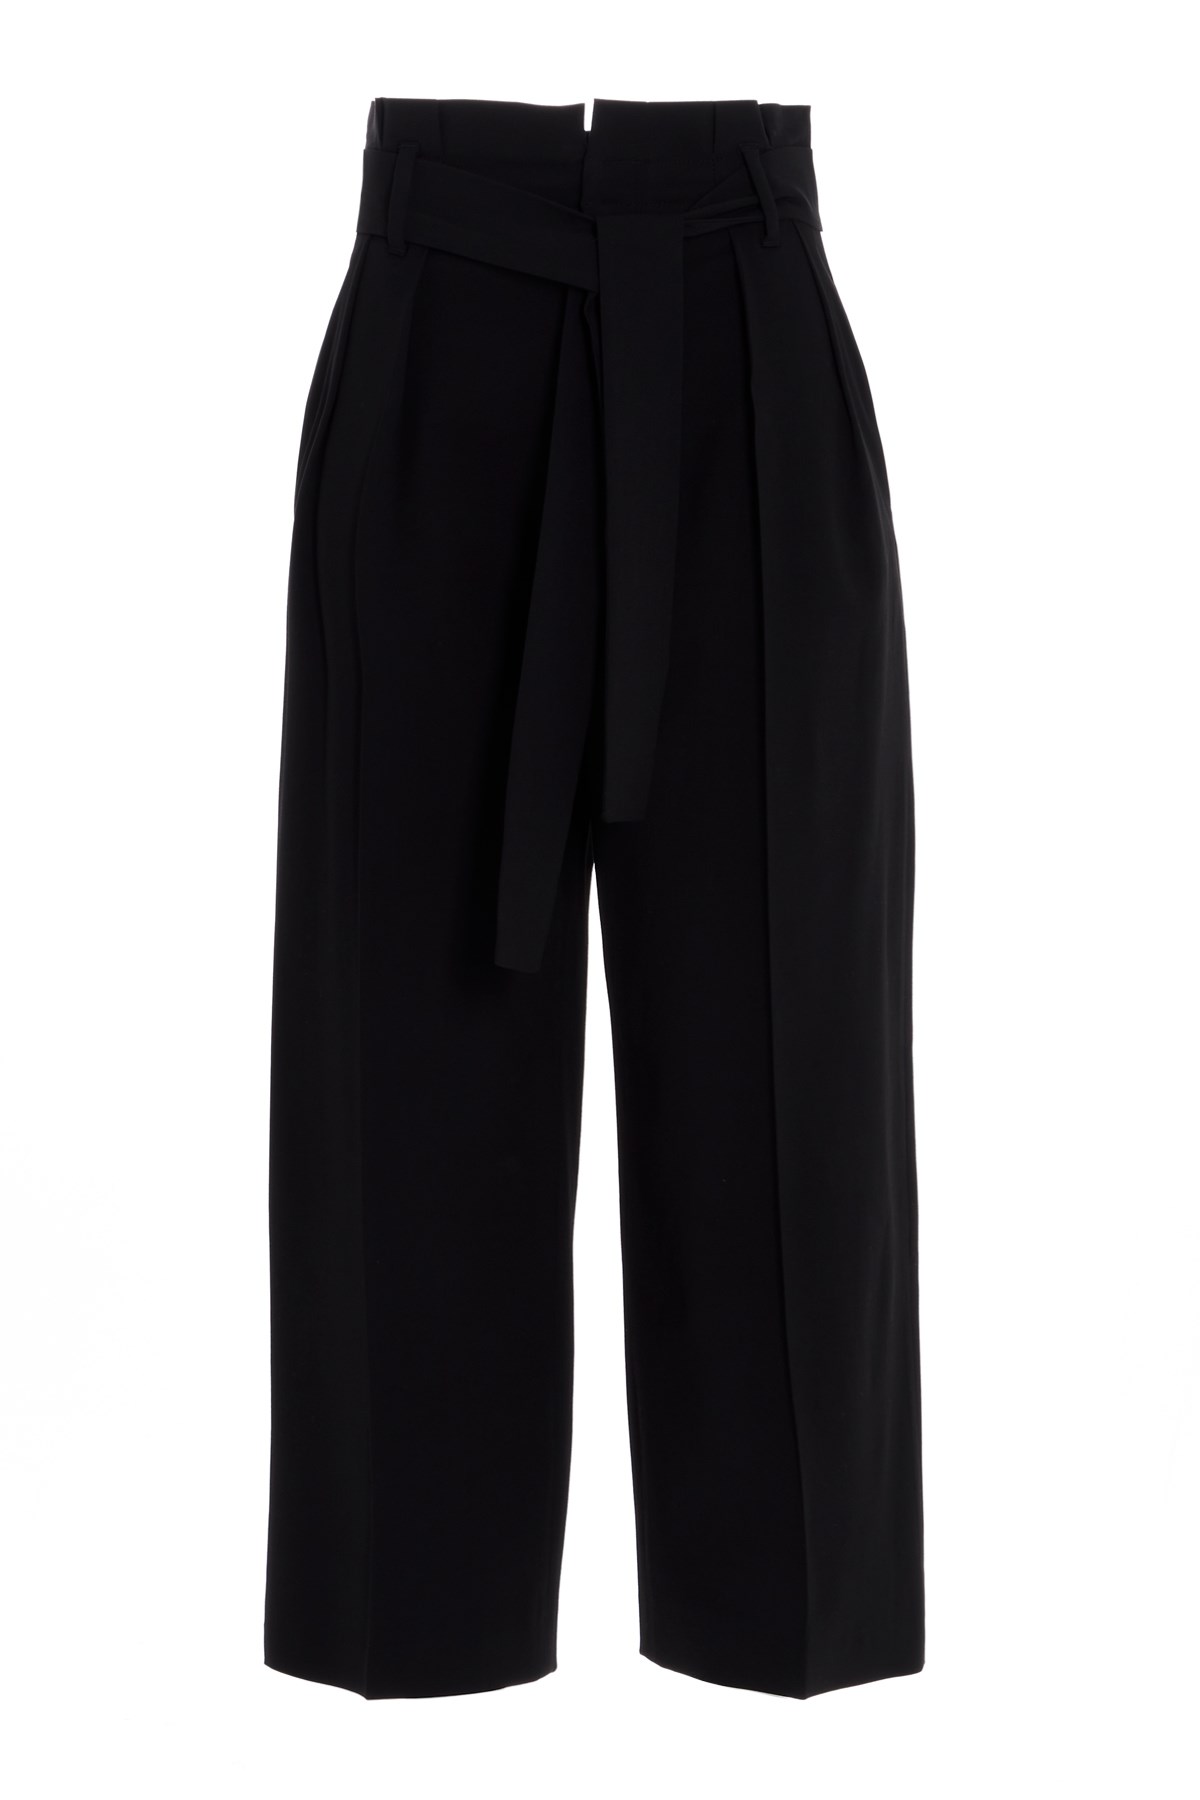 REDVALENTINO Cropped Belted Pants